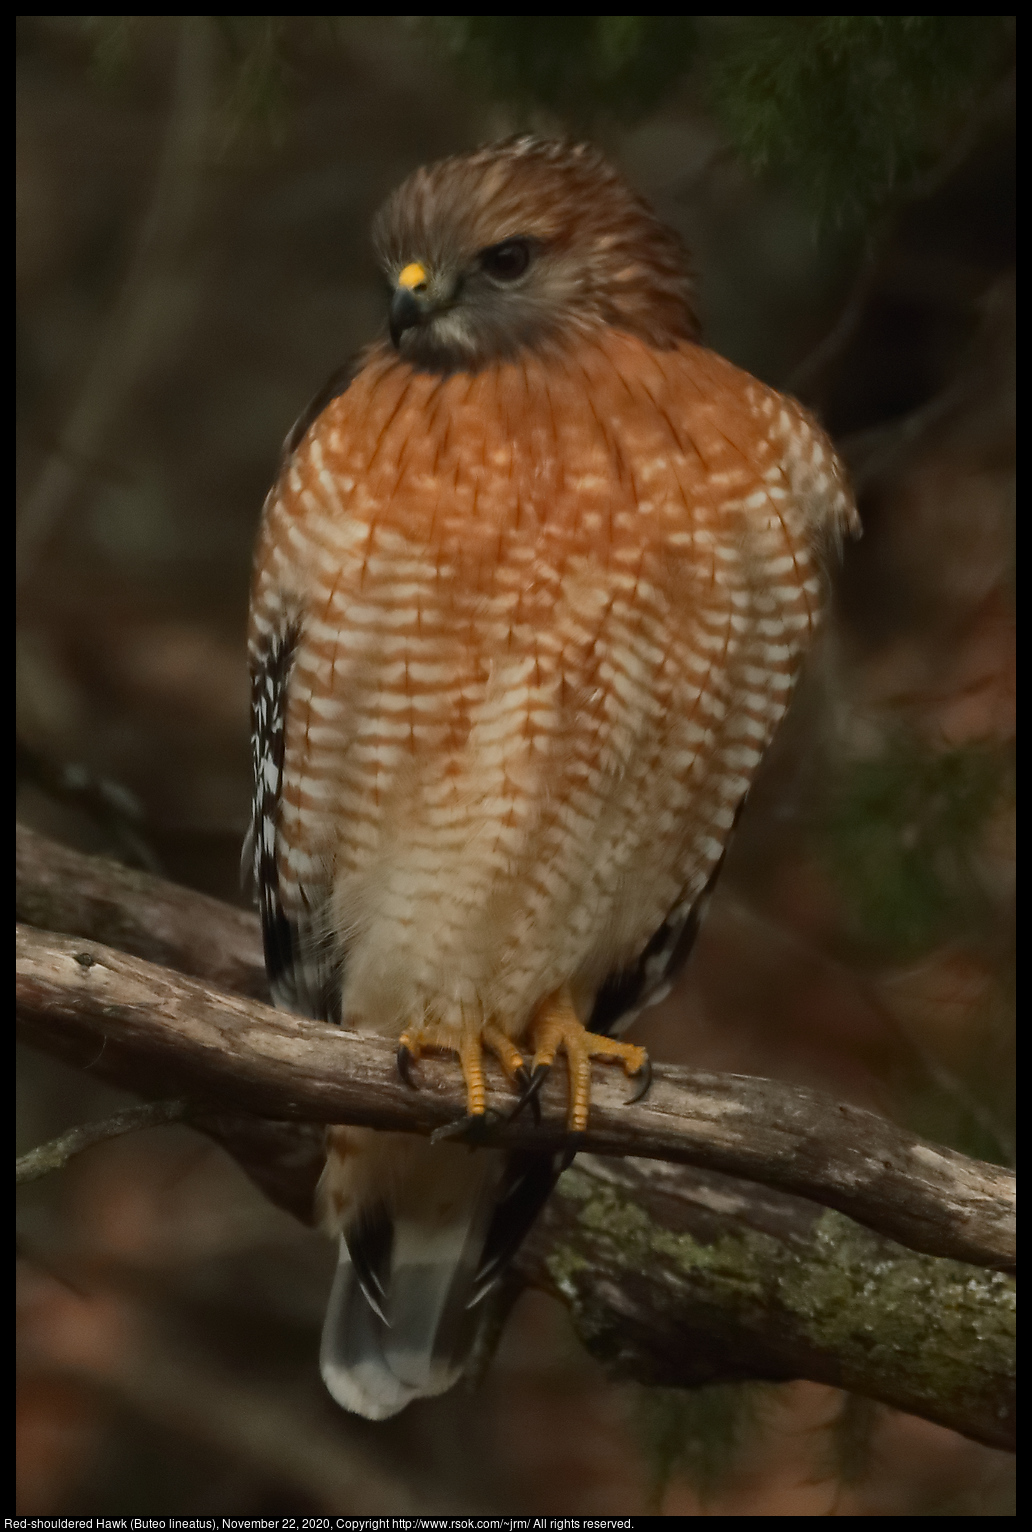 Red-shouldered Hawk (Buteo lineatus), November 22, 2020